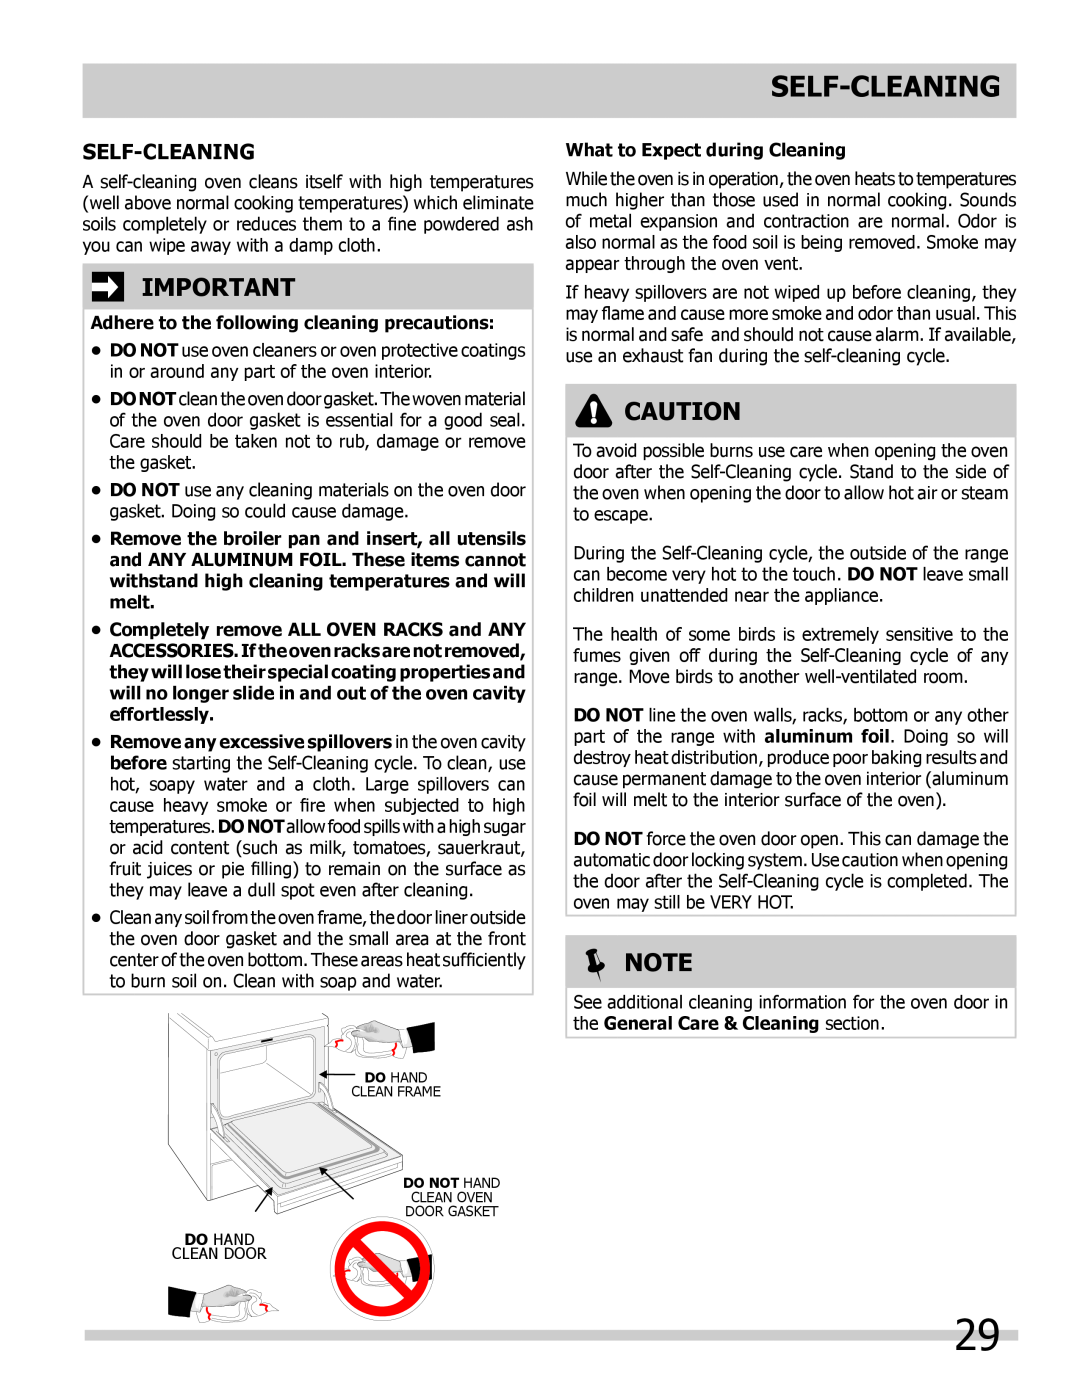 Frigidaire L5V3E4 Self-Cleaning, Adhere to the following cleaning precautions, What to Expect during Cleaning, Note 